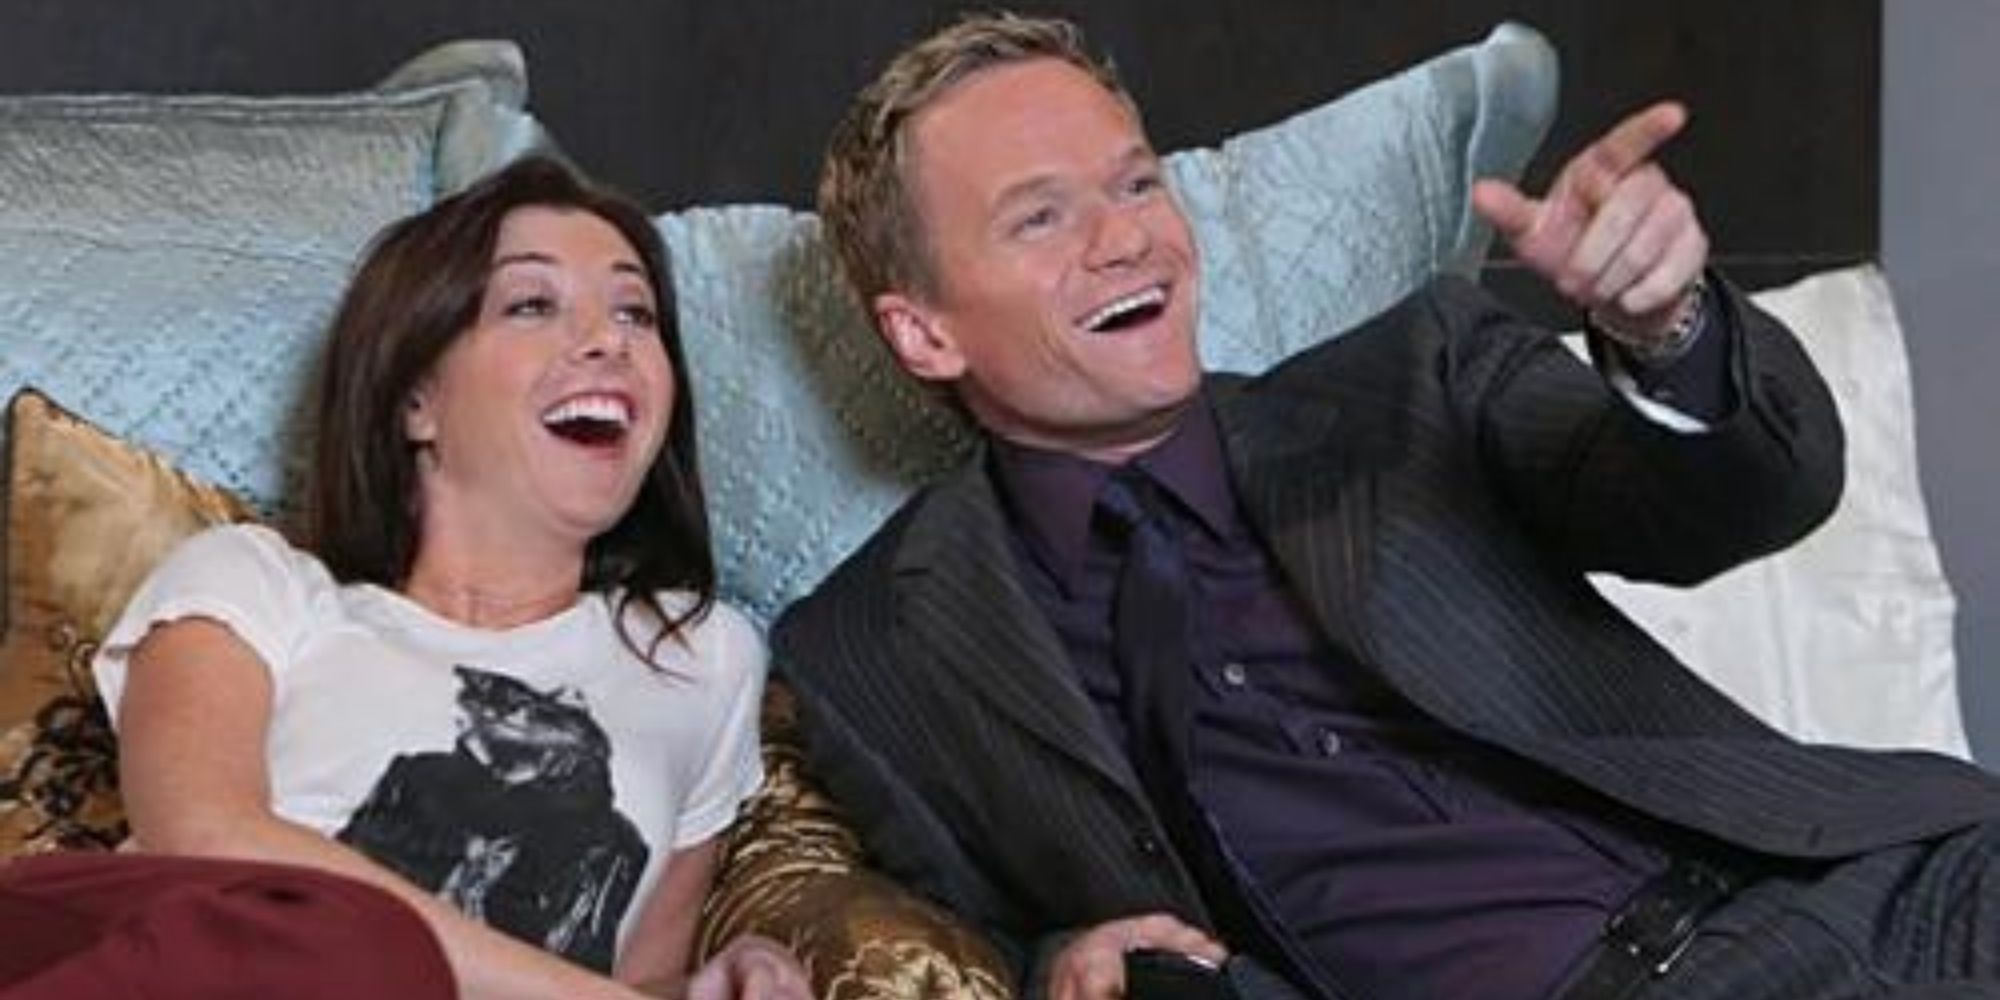 Lily and Barney from How I Met Your Mother lying on the bed together